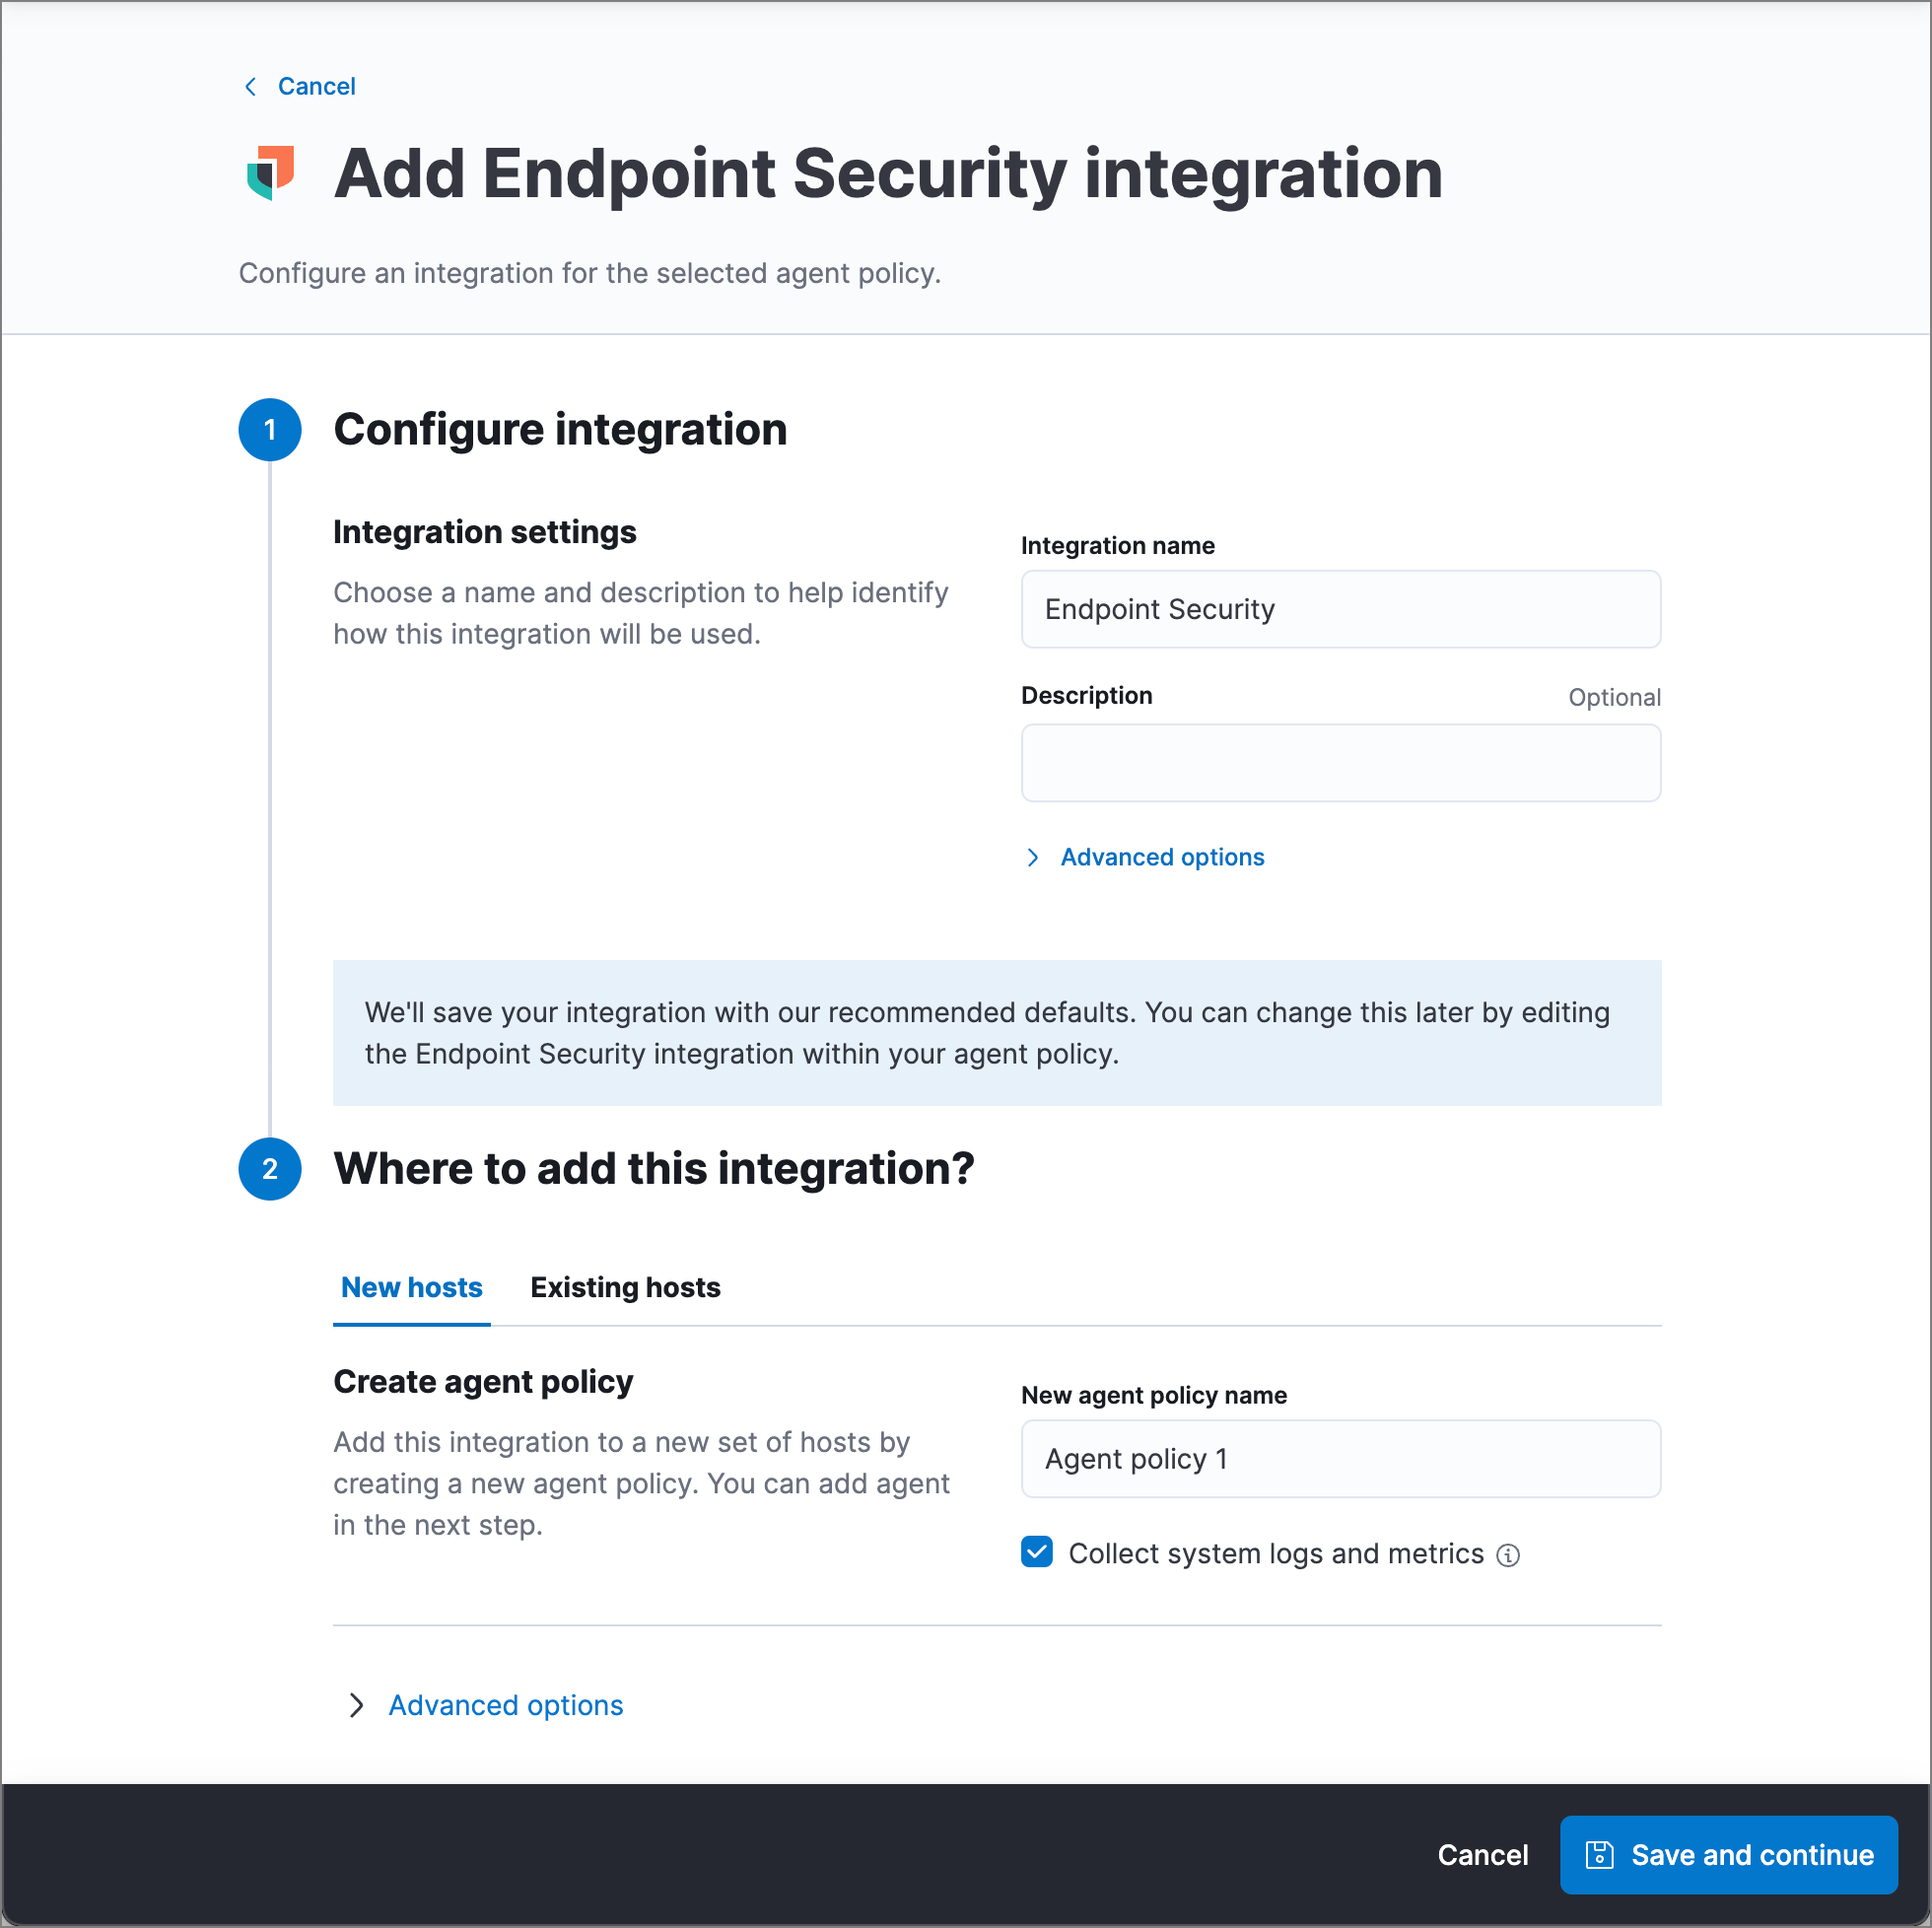 Add Endpoint Security integration page.